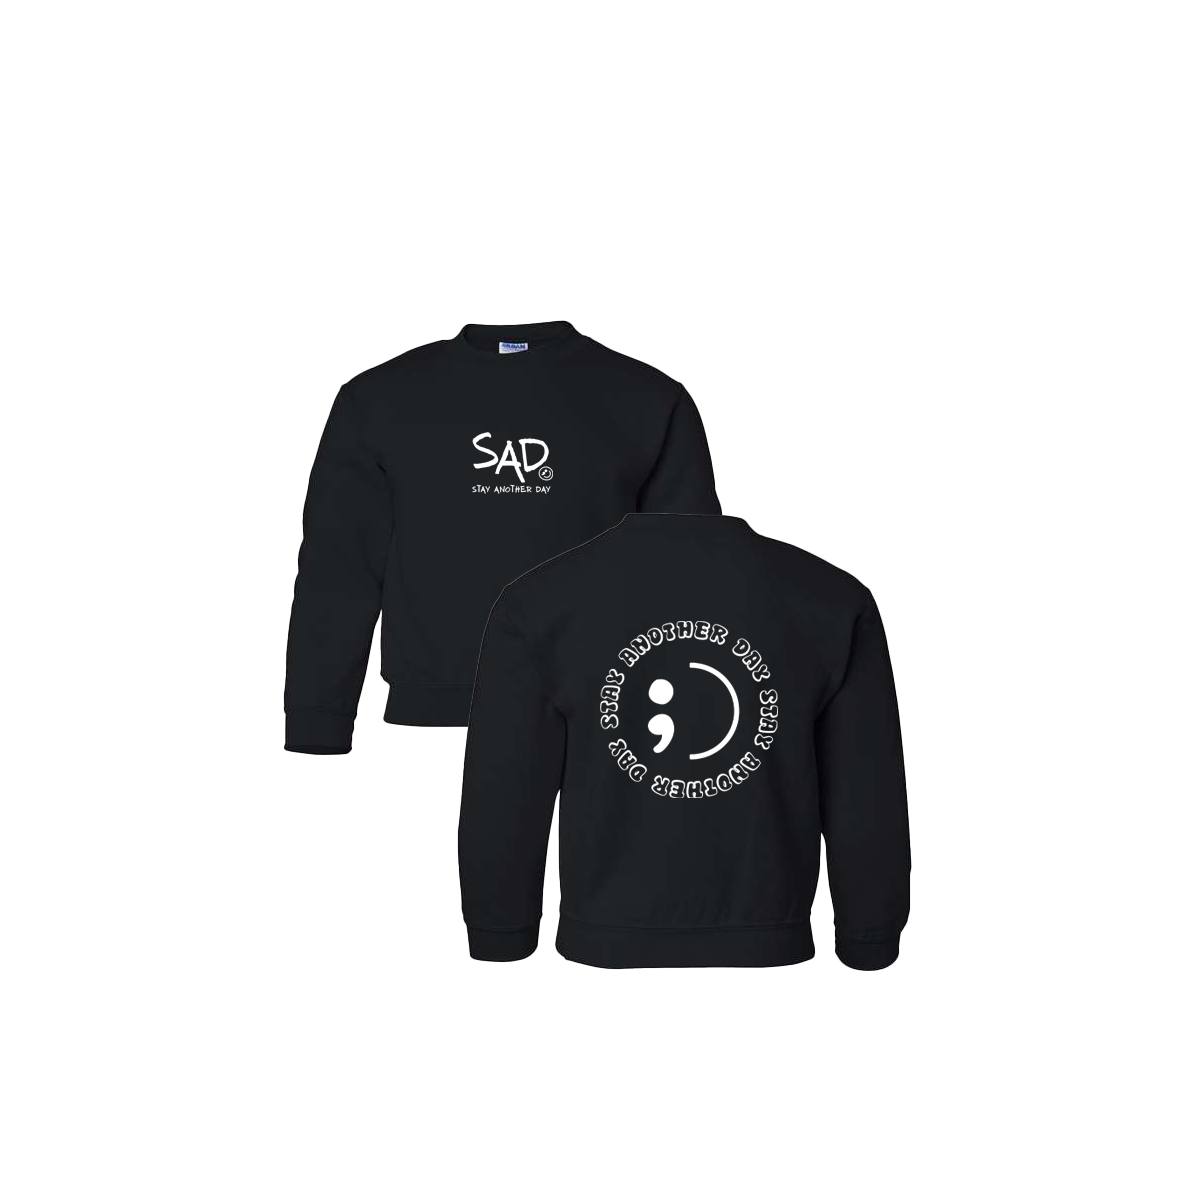 Stay Another Day Circle Screen Printed Black Youth Crewneck